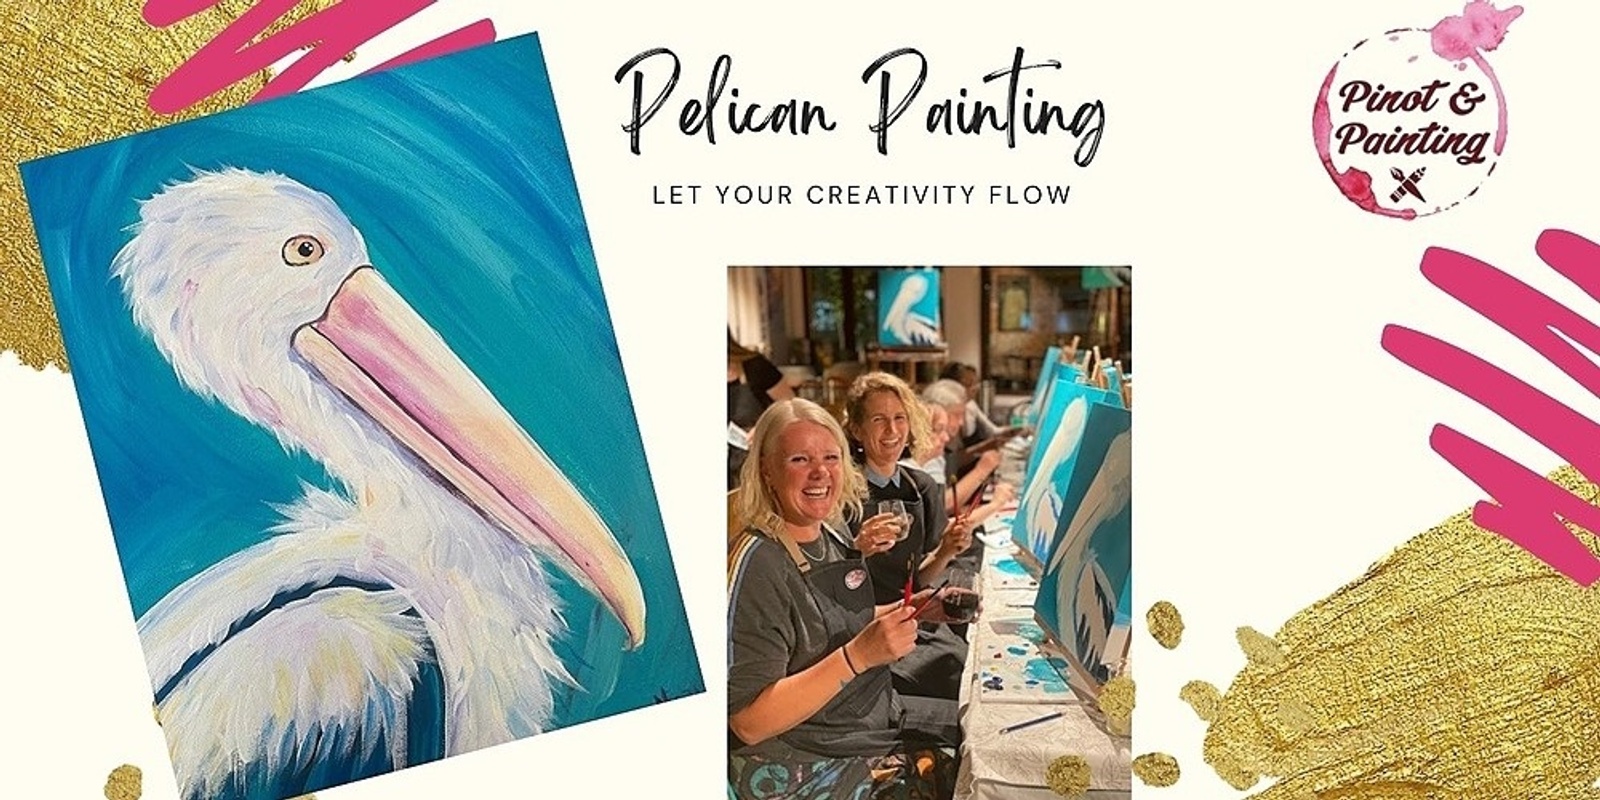 Pelican Painting - Social Art @ The Guildford Hotel